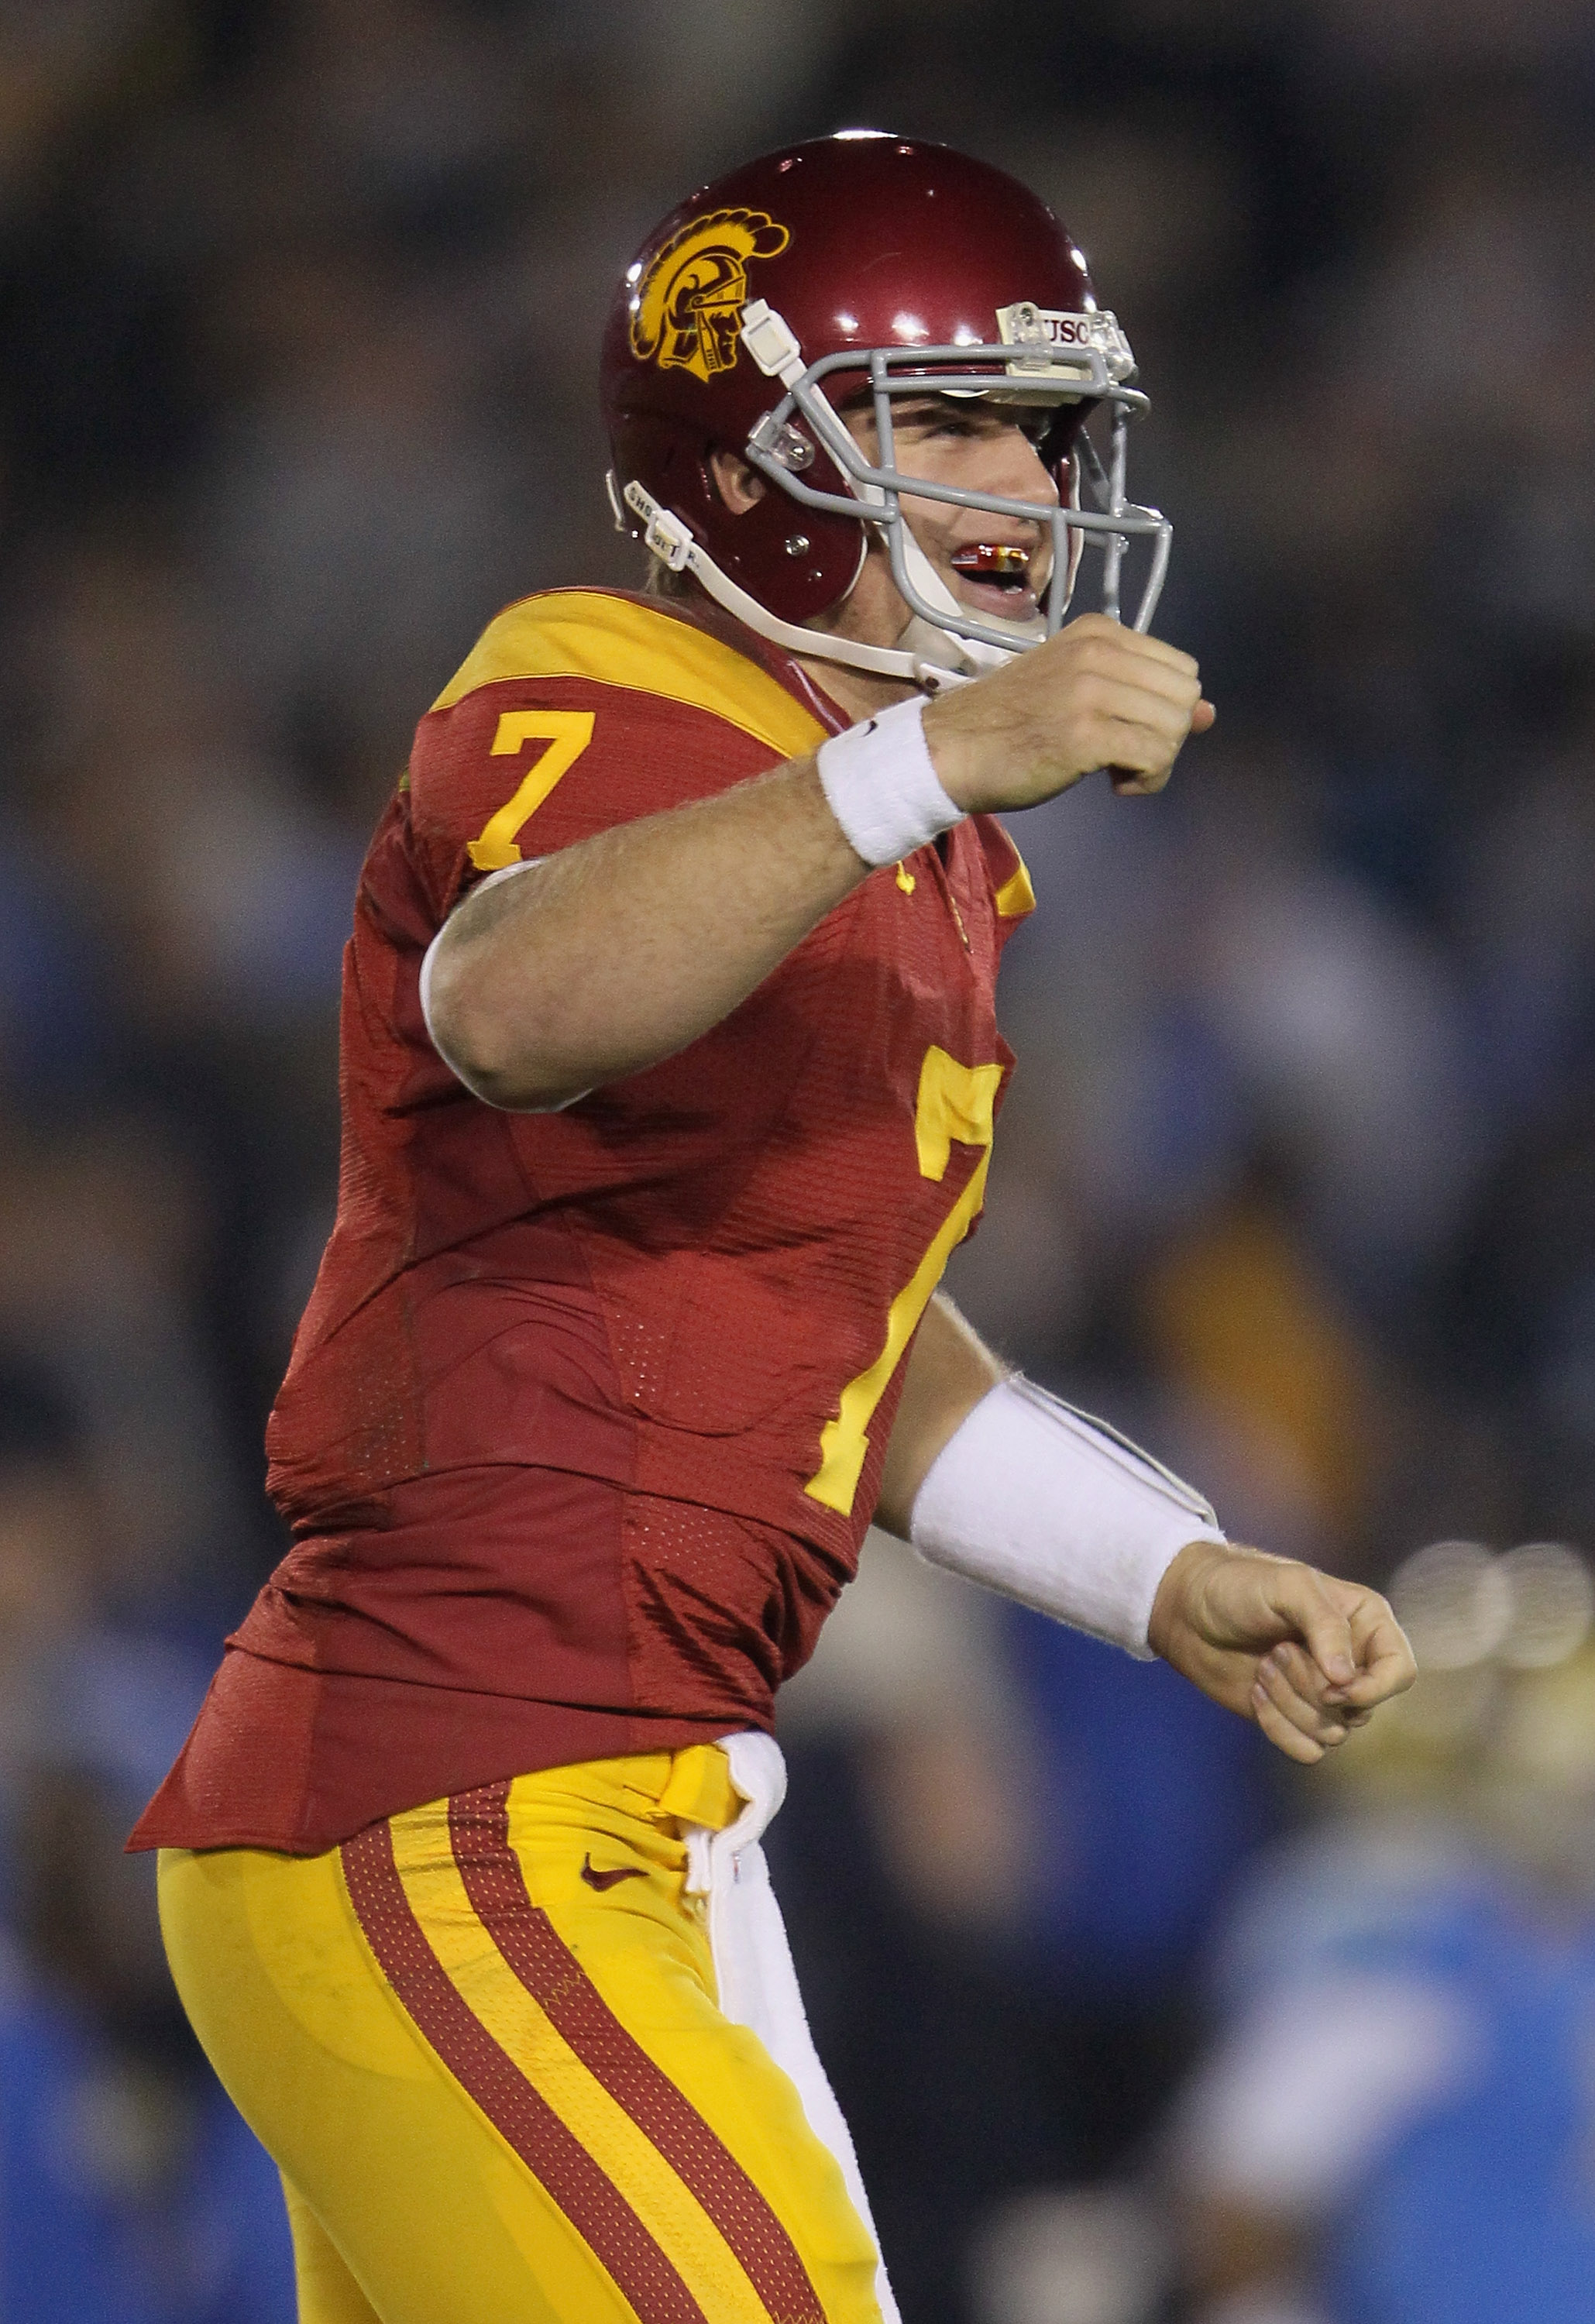 PASADENA, CA - DECEMBER 04:  Quarterback Matt Barkley #7 of the USC Trojans celebrates following a touchdown by running back Allen Bradford (not pictured) late in the second half against the UCLA Bruins at the Rose Bowl on December 4, 2010 in Pasadena, Ca